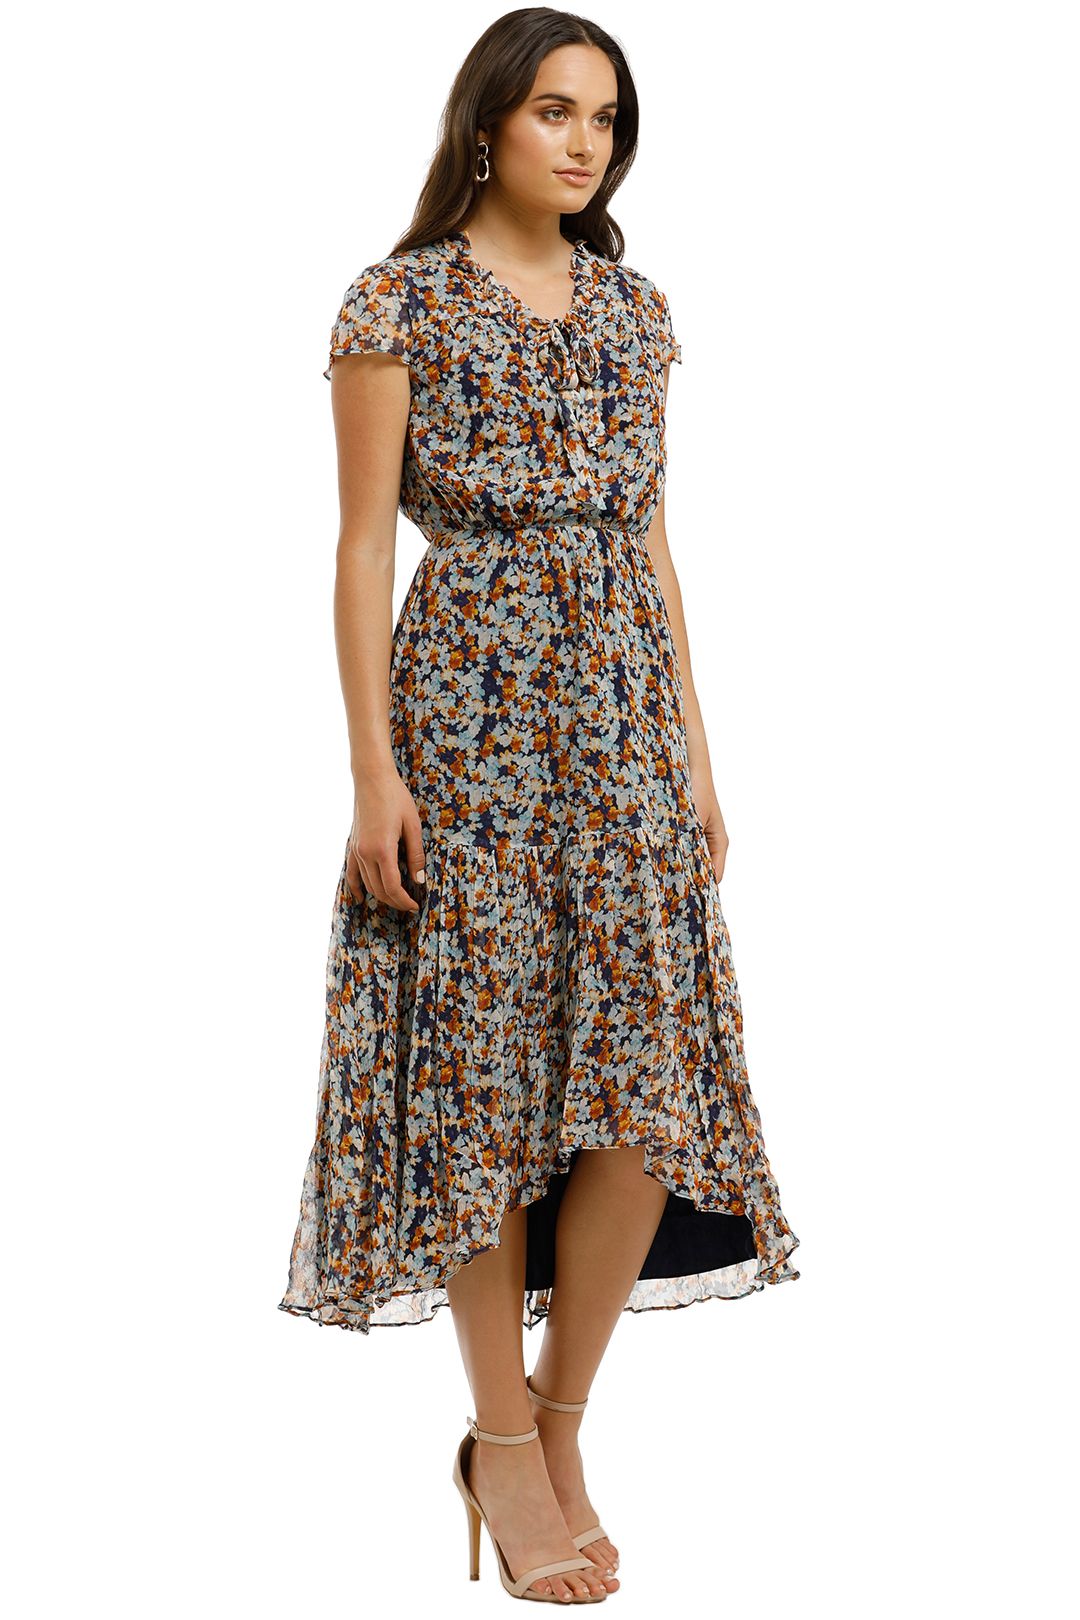 Stevie-May-Dixie-Midi-Dress-Dixie-Cup-Floral-Side